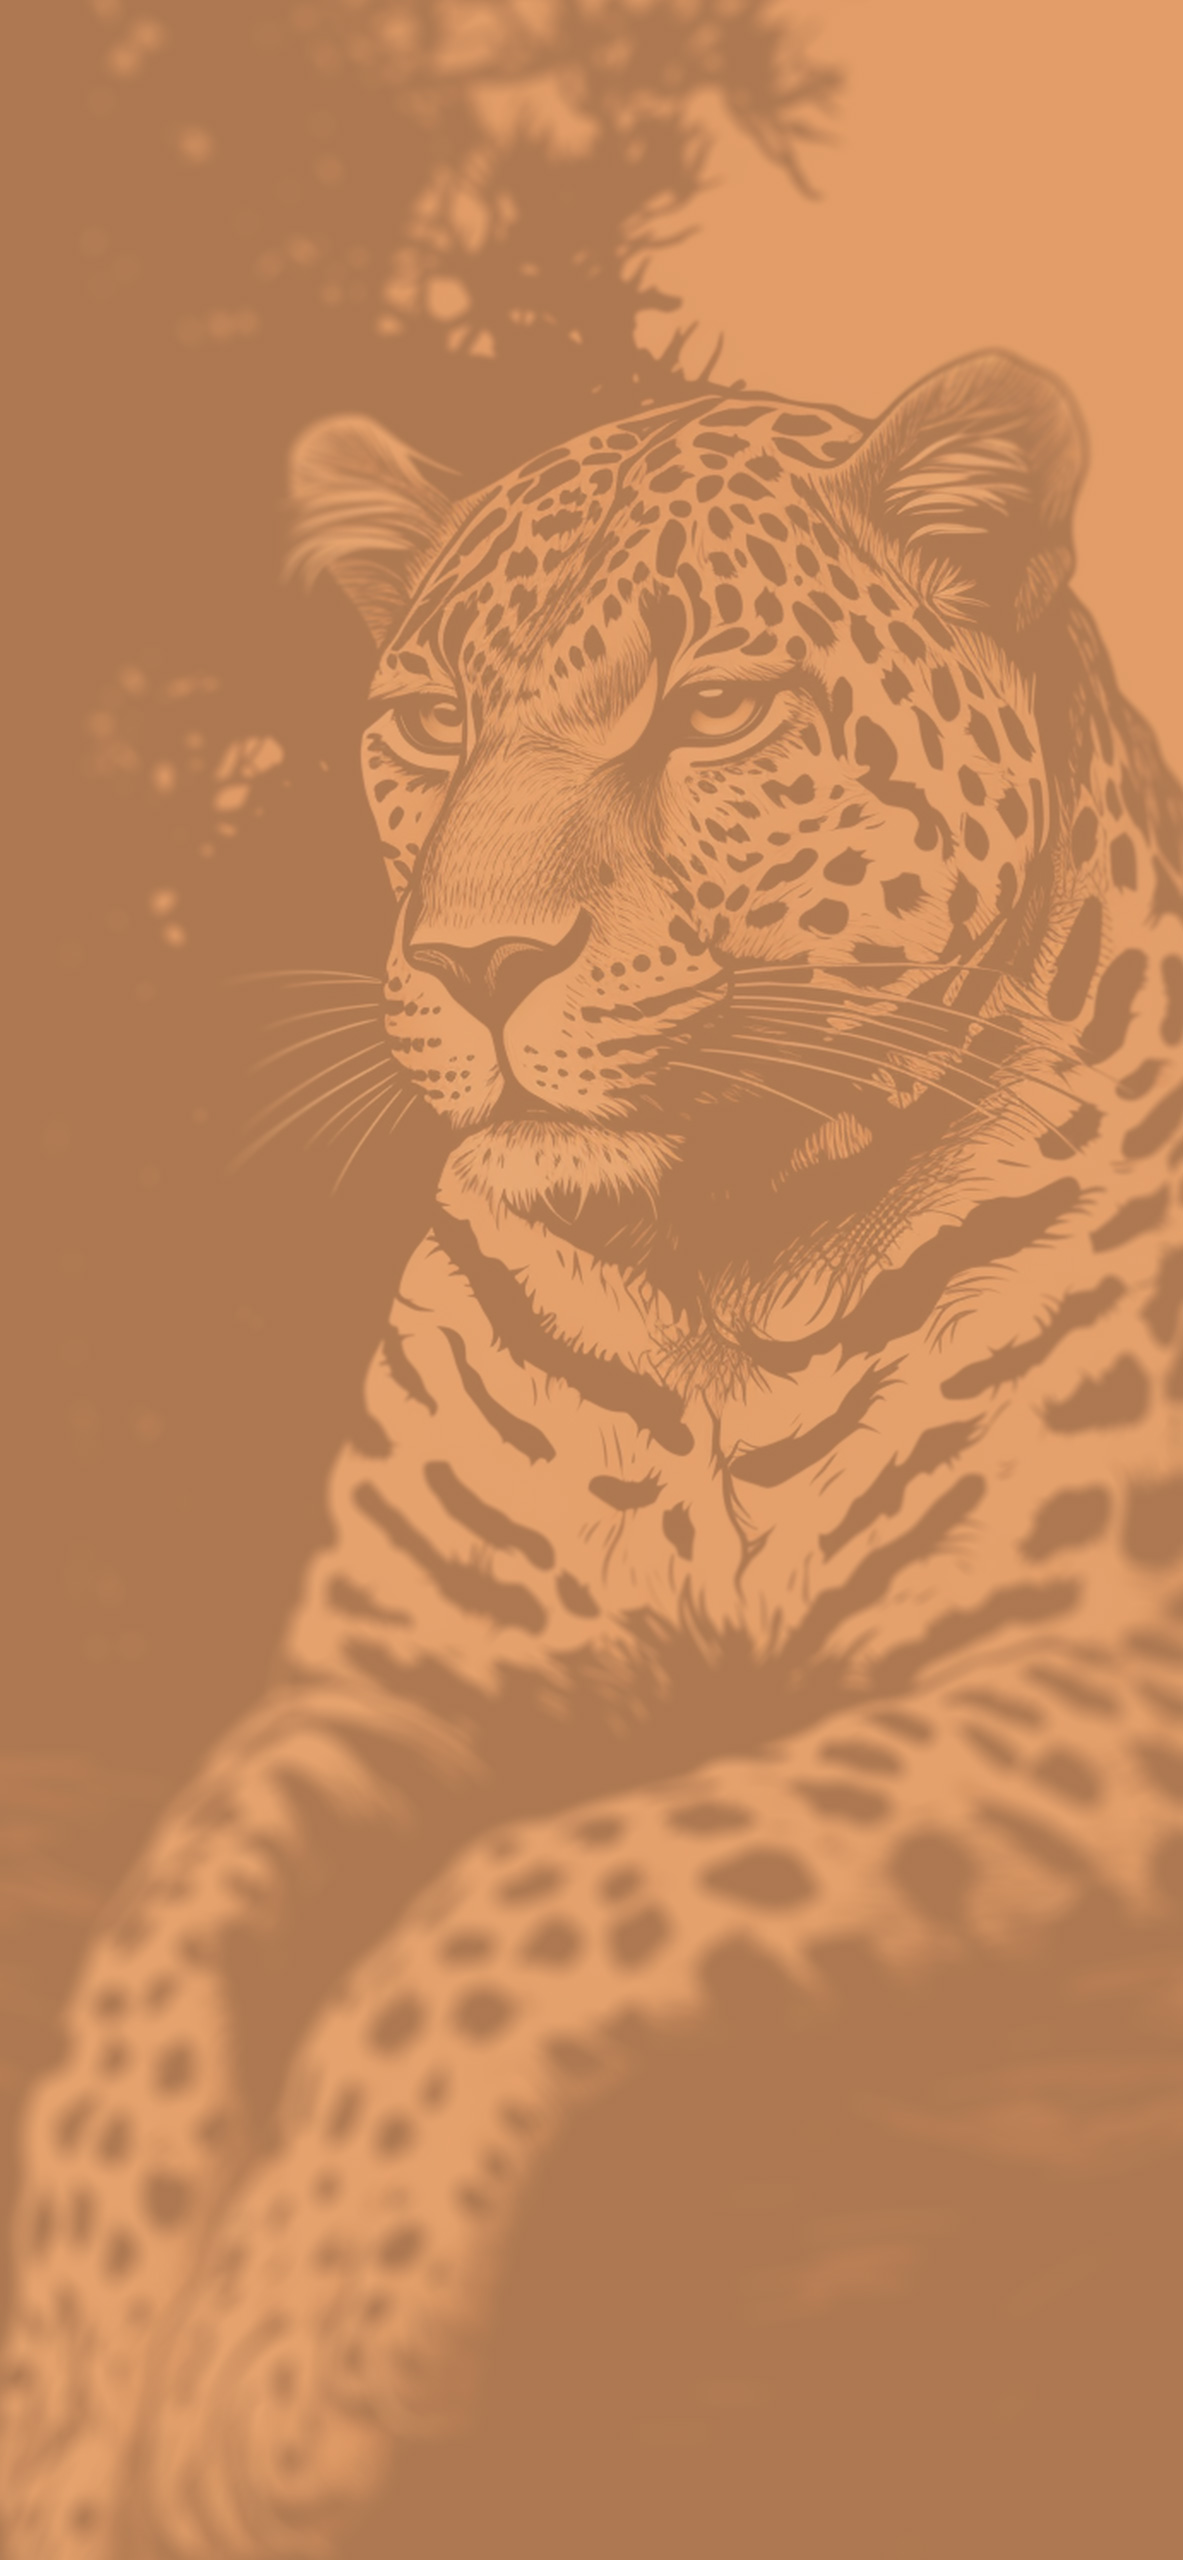 Cute little leopard 750x1334 iPhone 8766S wallpaper background  picture image